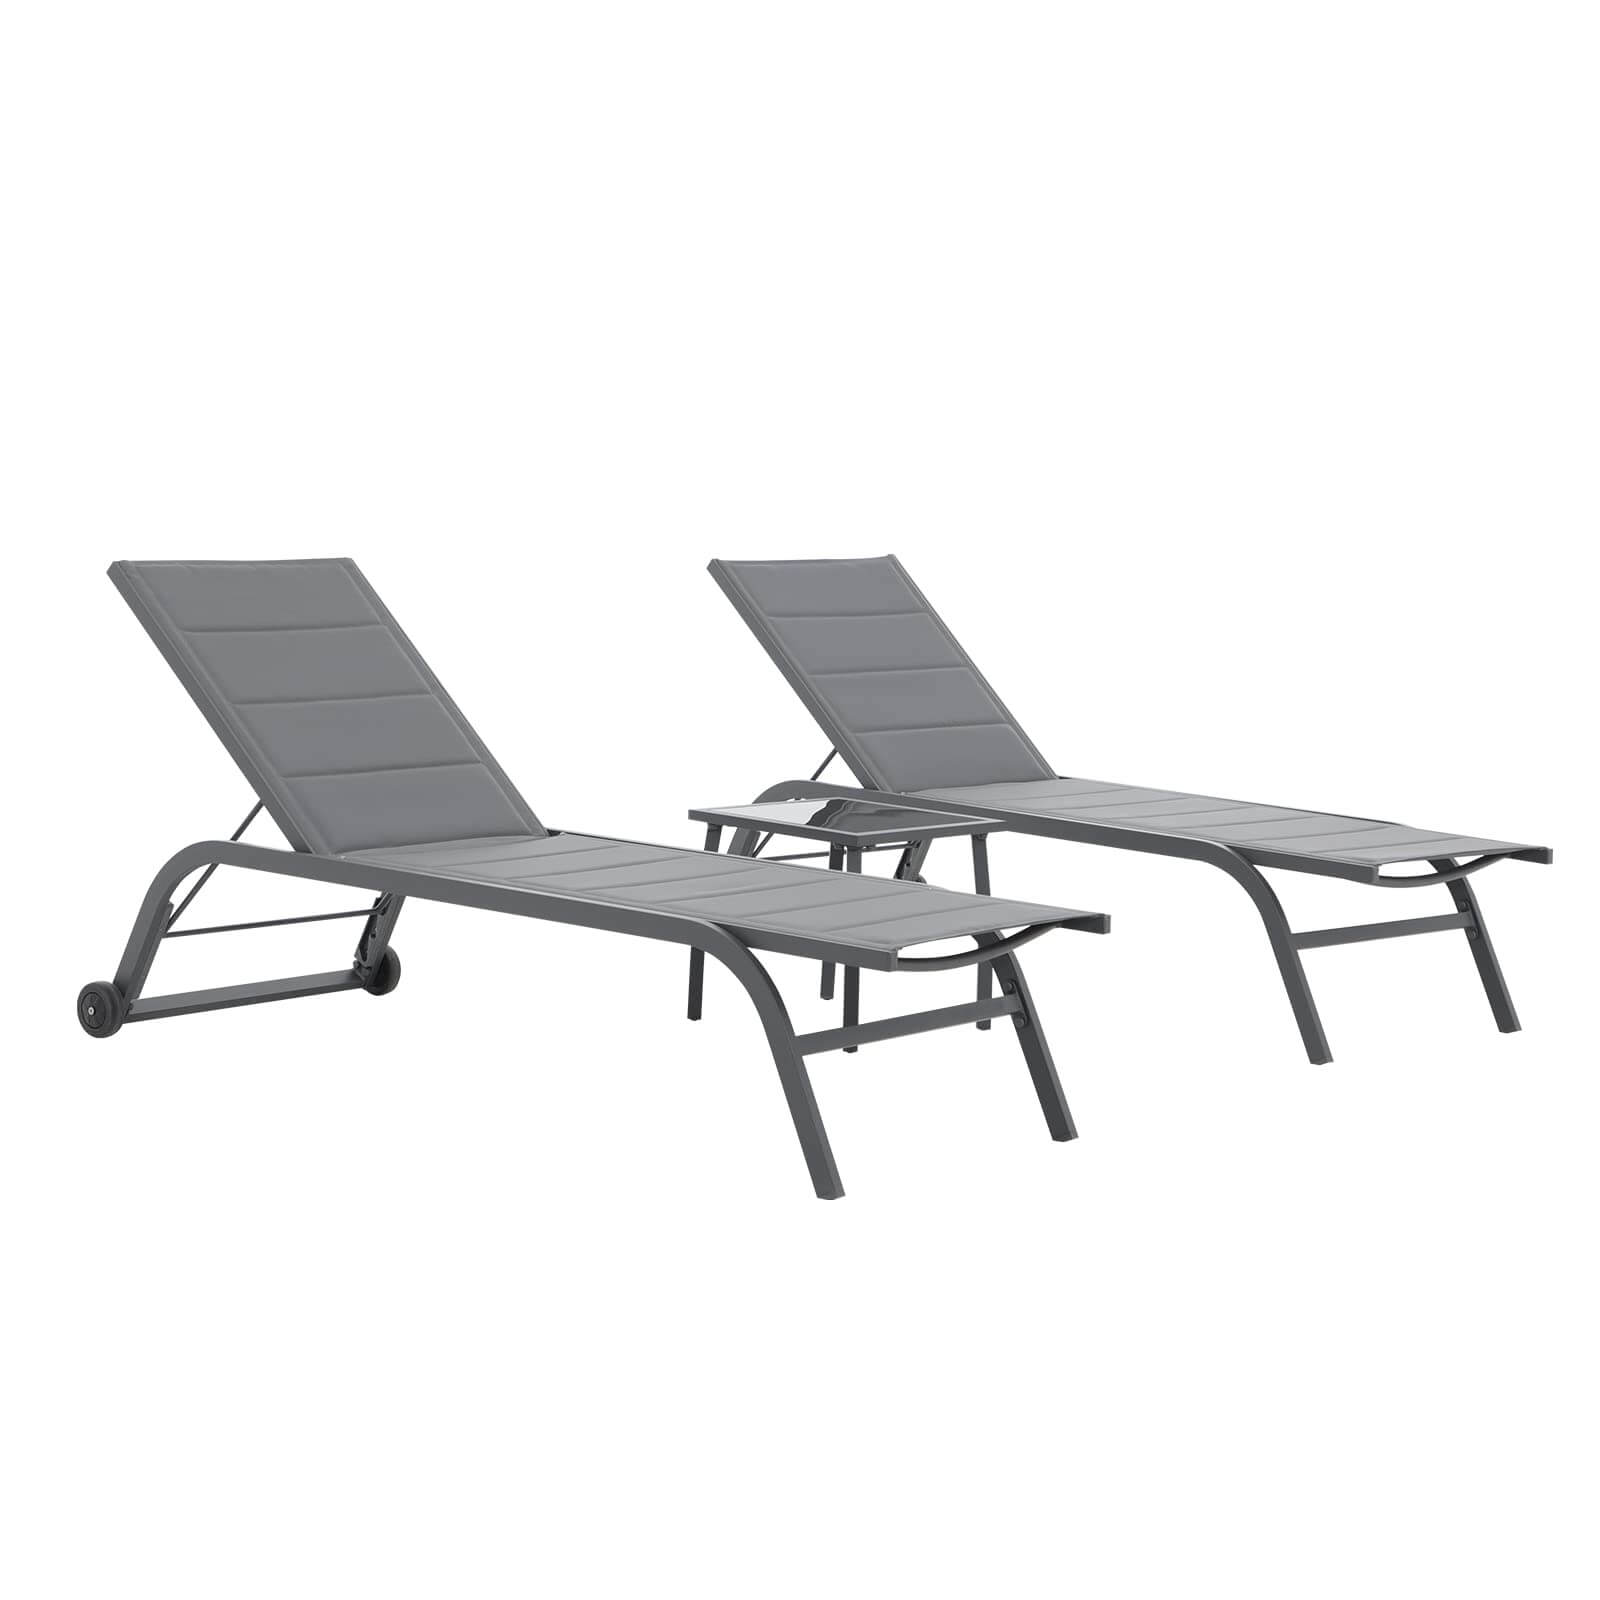 Outdoor Patio Chaise Lounge Chair Set of 3, Aluminum Textilene Padded Adjustable Recliner w Wheels, Side Table